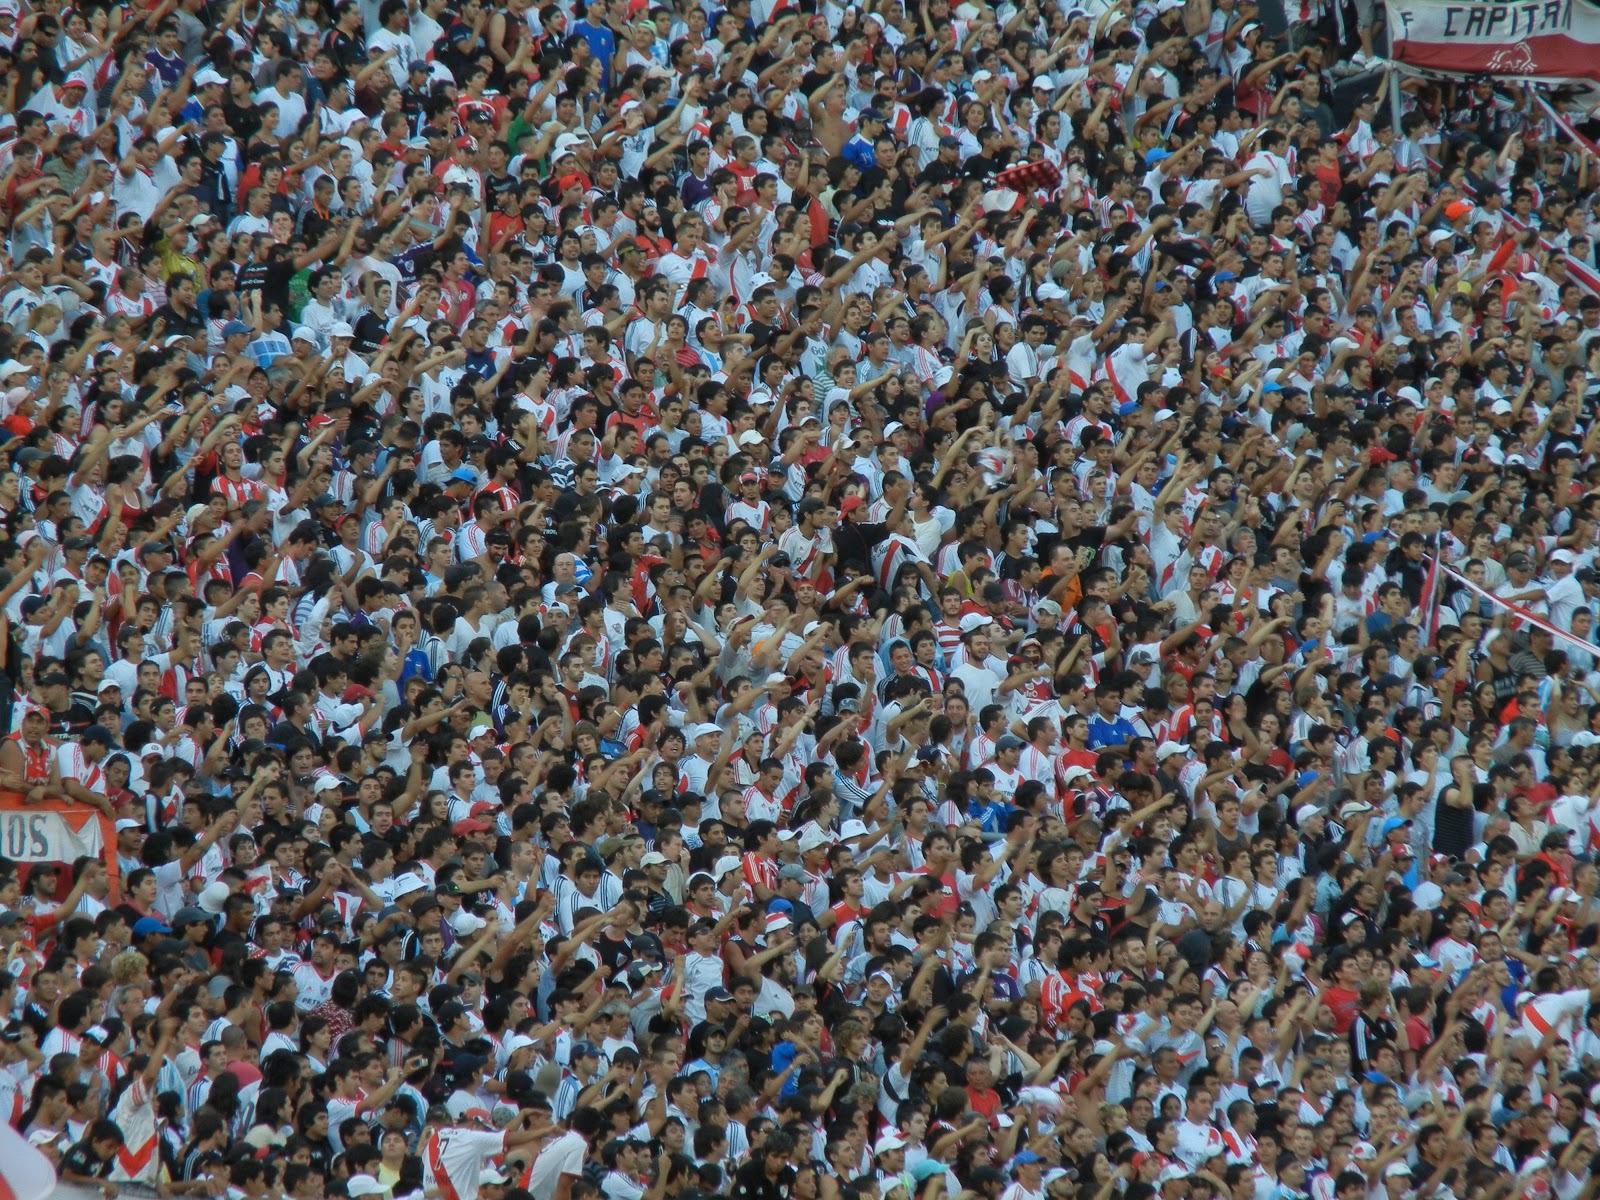 Soccer Stadium Crowd Wallpaper That Is How Serious